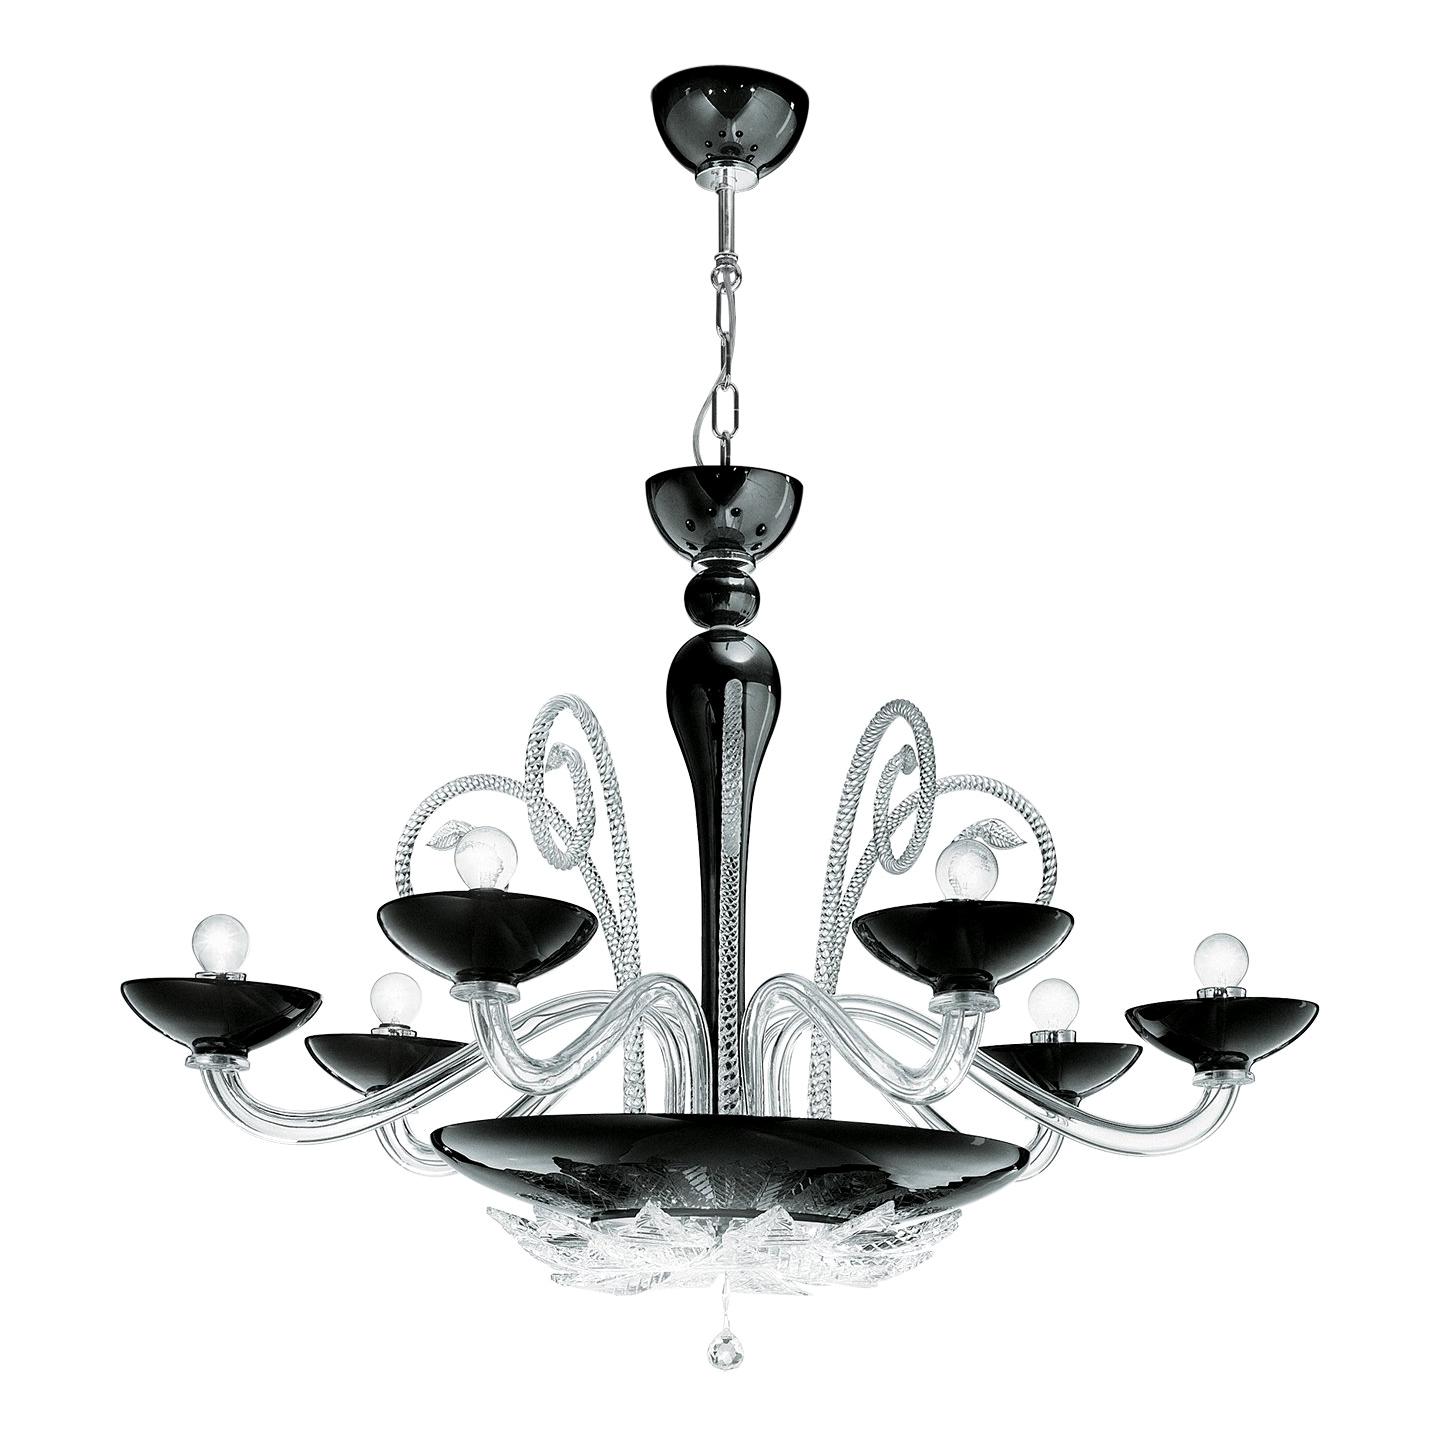 Italian Leucos Orleans L 12 Chandelier in Black and Crystal and Chrome by MariToscano For Sale